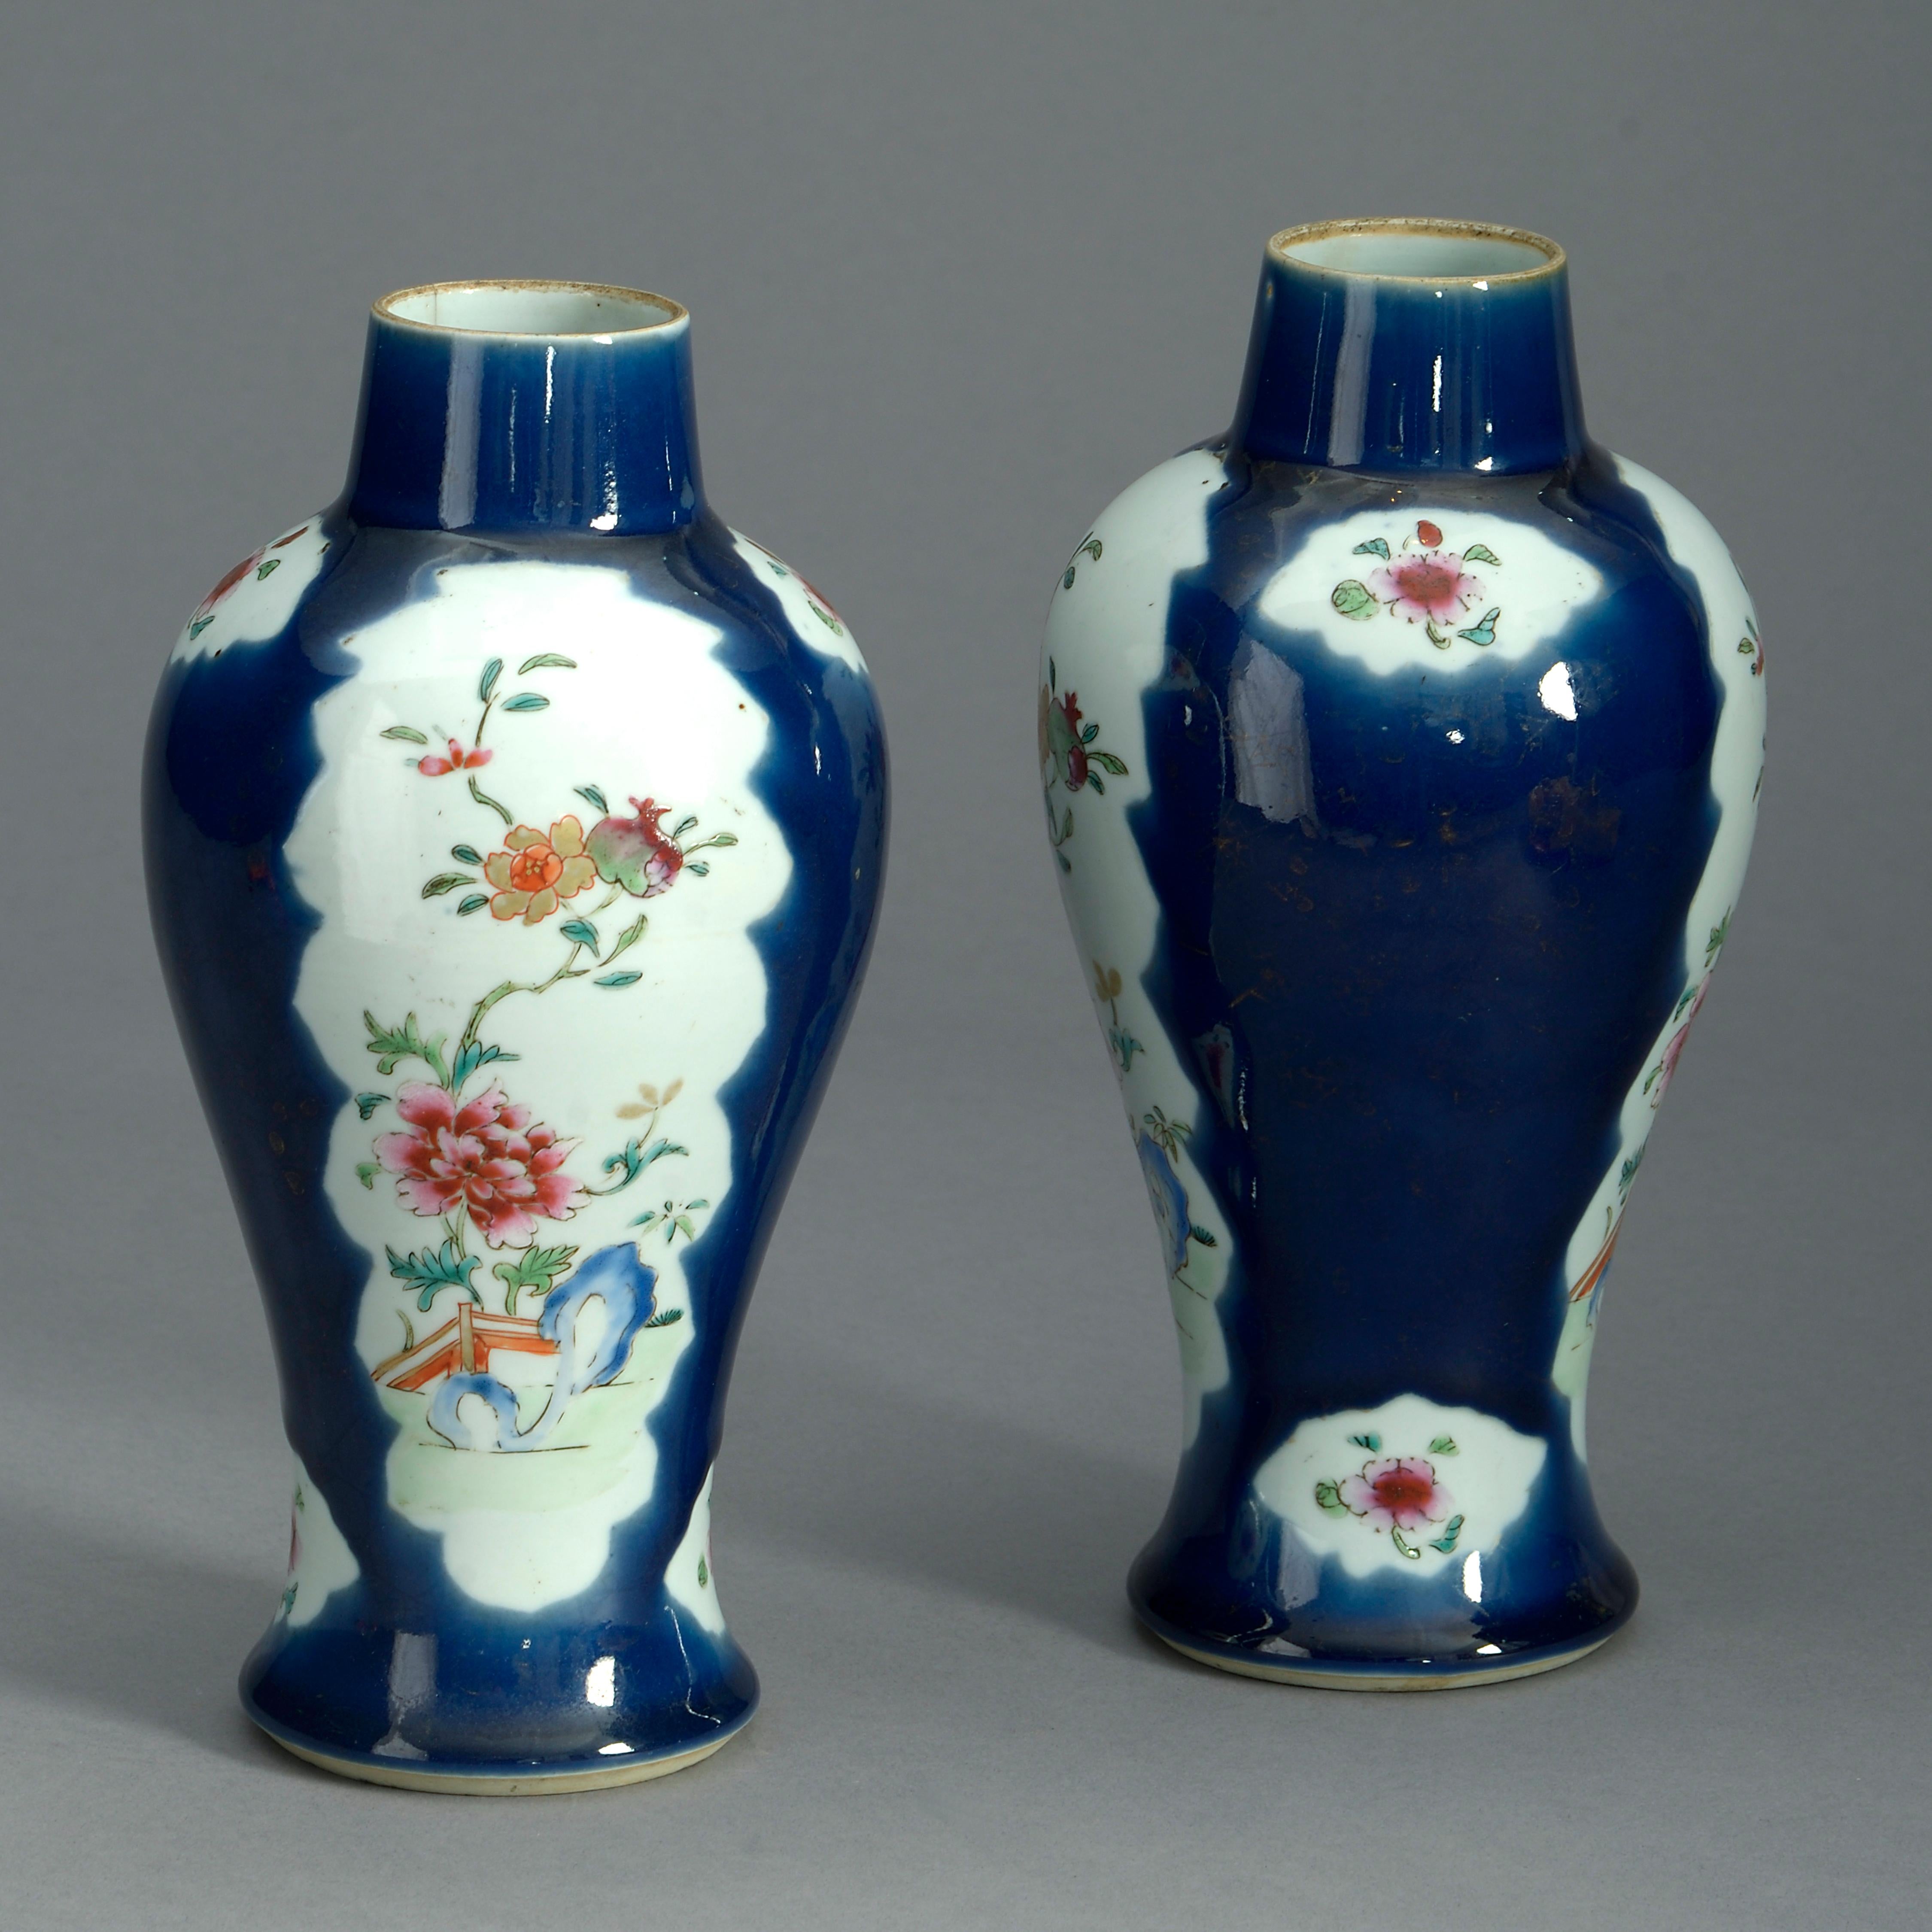 A pair of mid-18th century famille rose porcelain baluster vases, the leaf shaped cartouches with floral motifs set within deep blue grounds retaining traces of gilded “cracked ice” and blossom motifs. One neck with hairline.

Qing Dynasty,